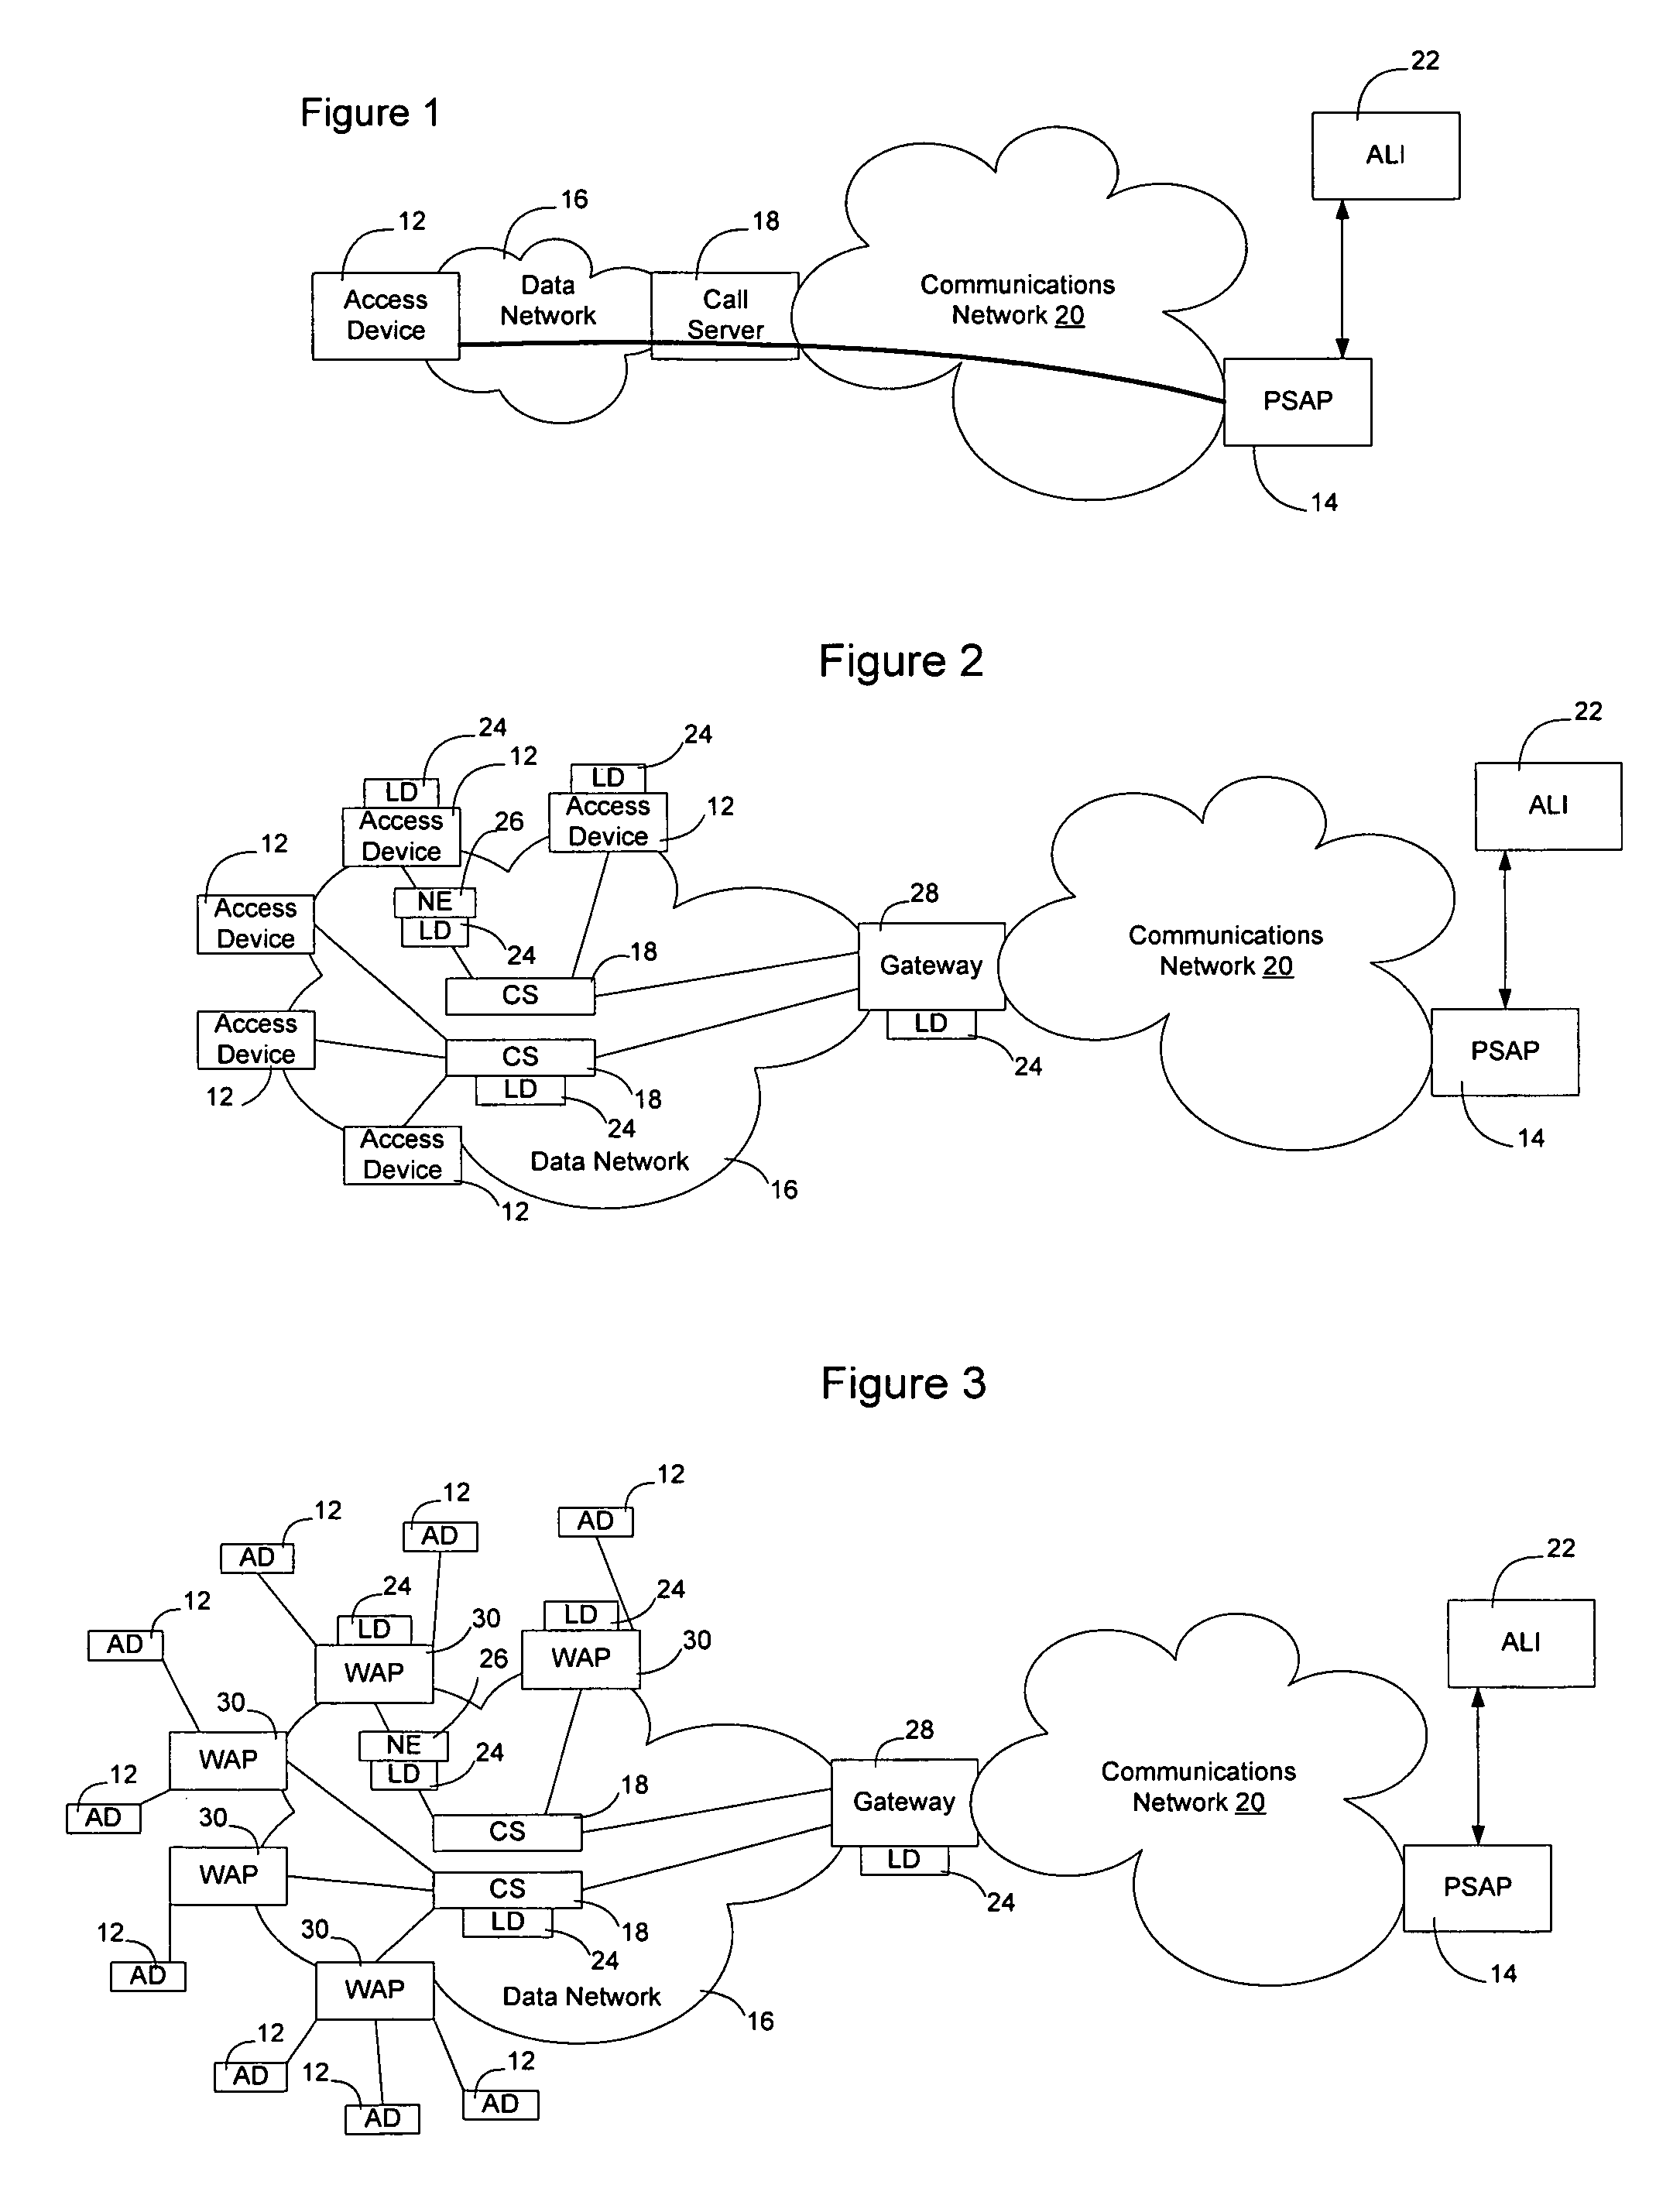 Method and apparatus for providing in-band location information in an emergency response network